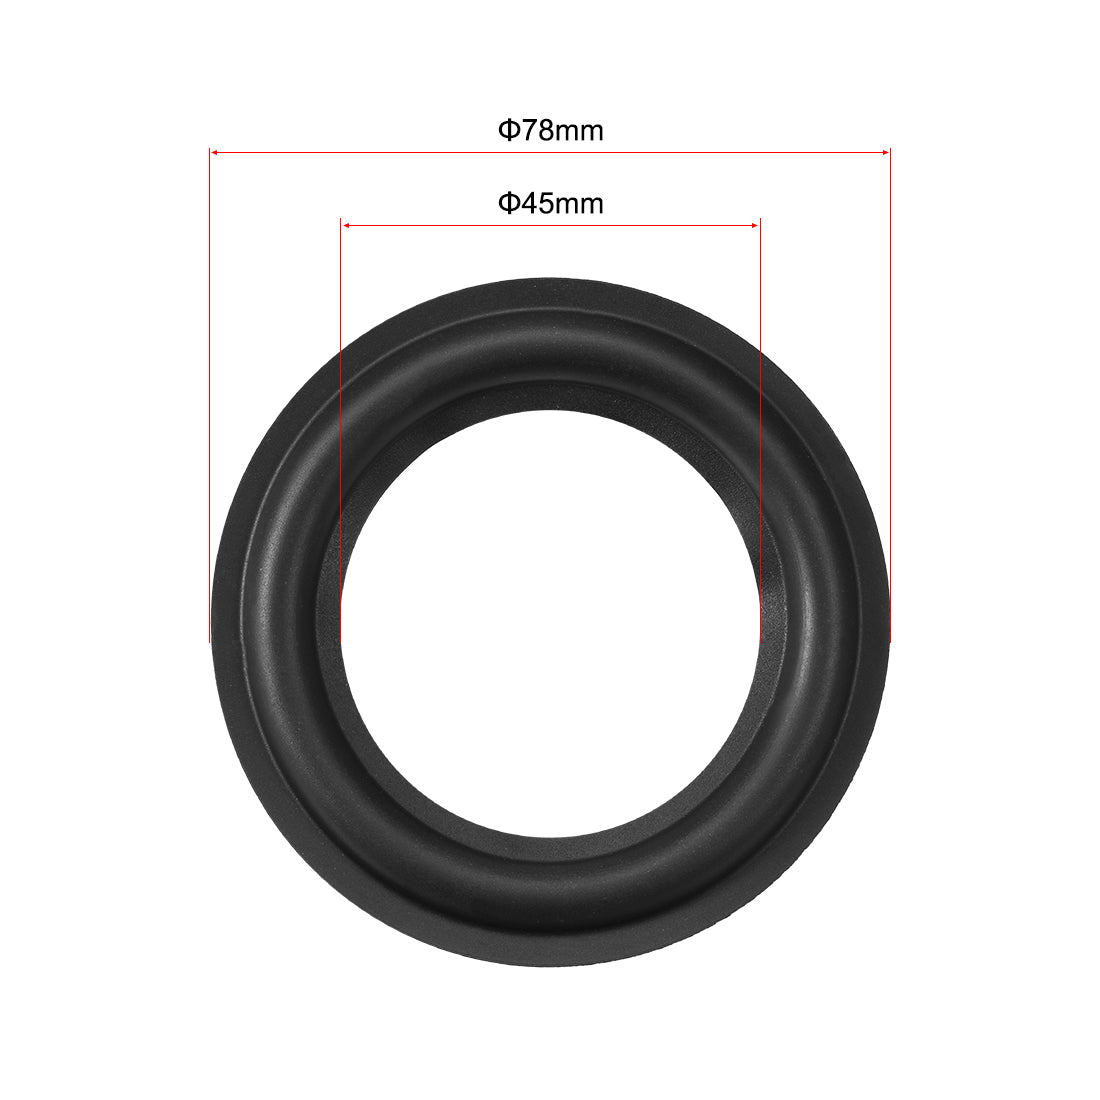 uxcell Uxcell 3inch Speaker Rubber Edge Surround Rings Replacement Parts for Speaker Repair or DIY